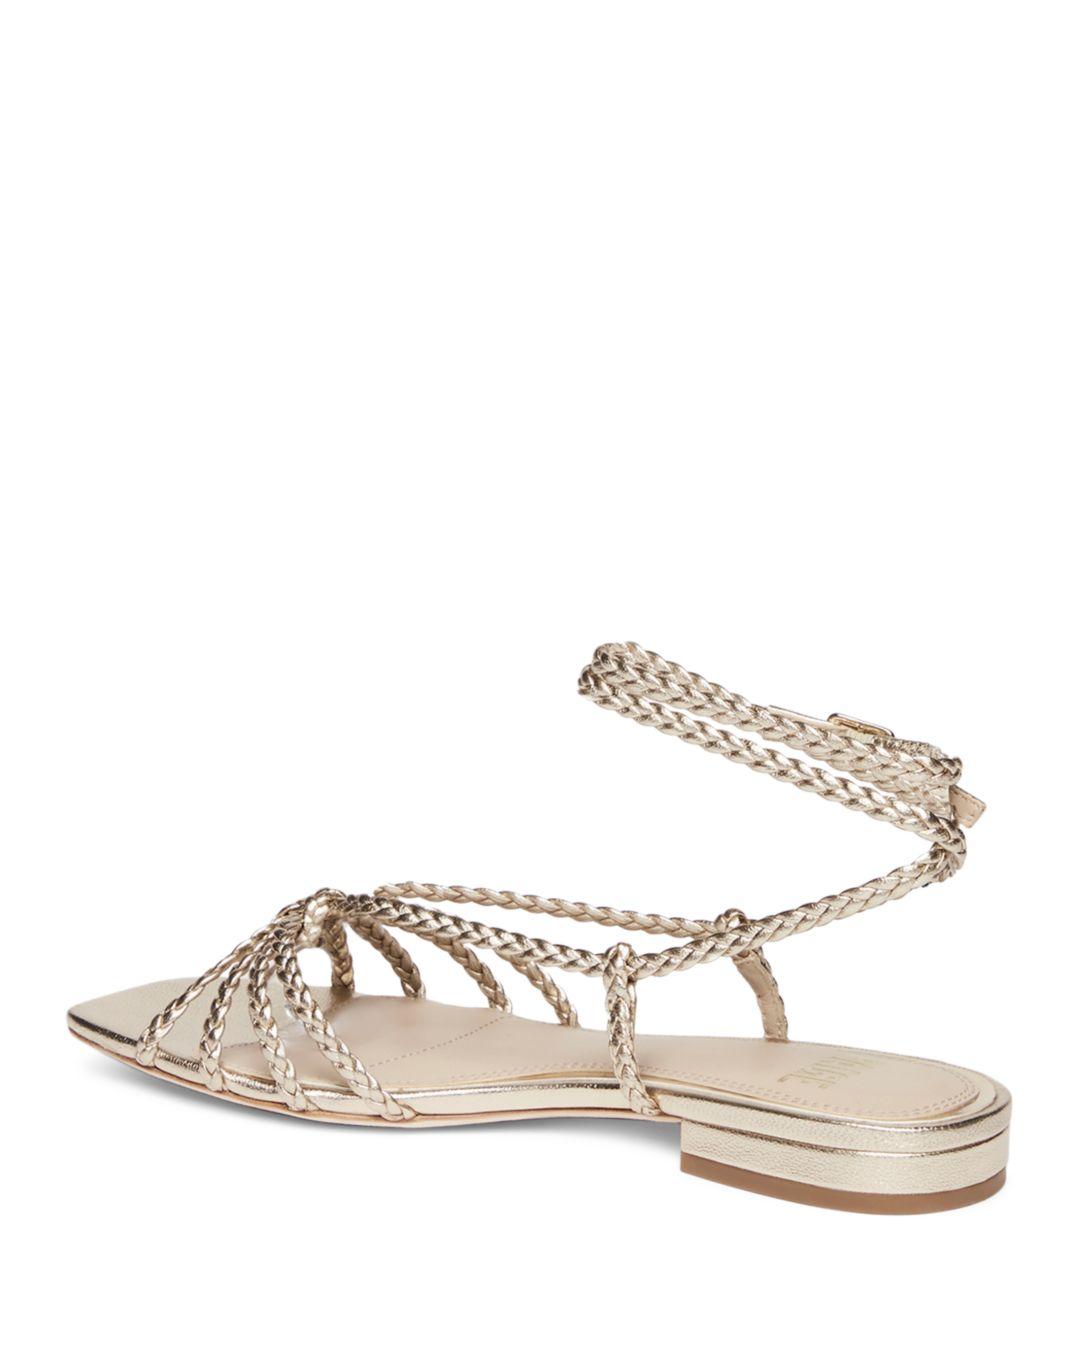 PAIGE Deanna Flat Sandals in Natural | Lyst